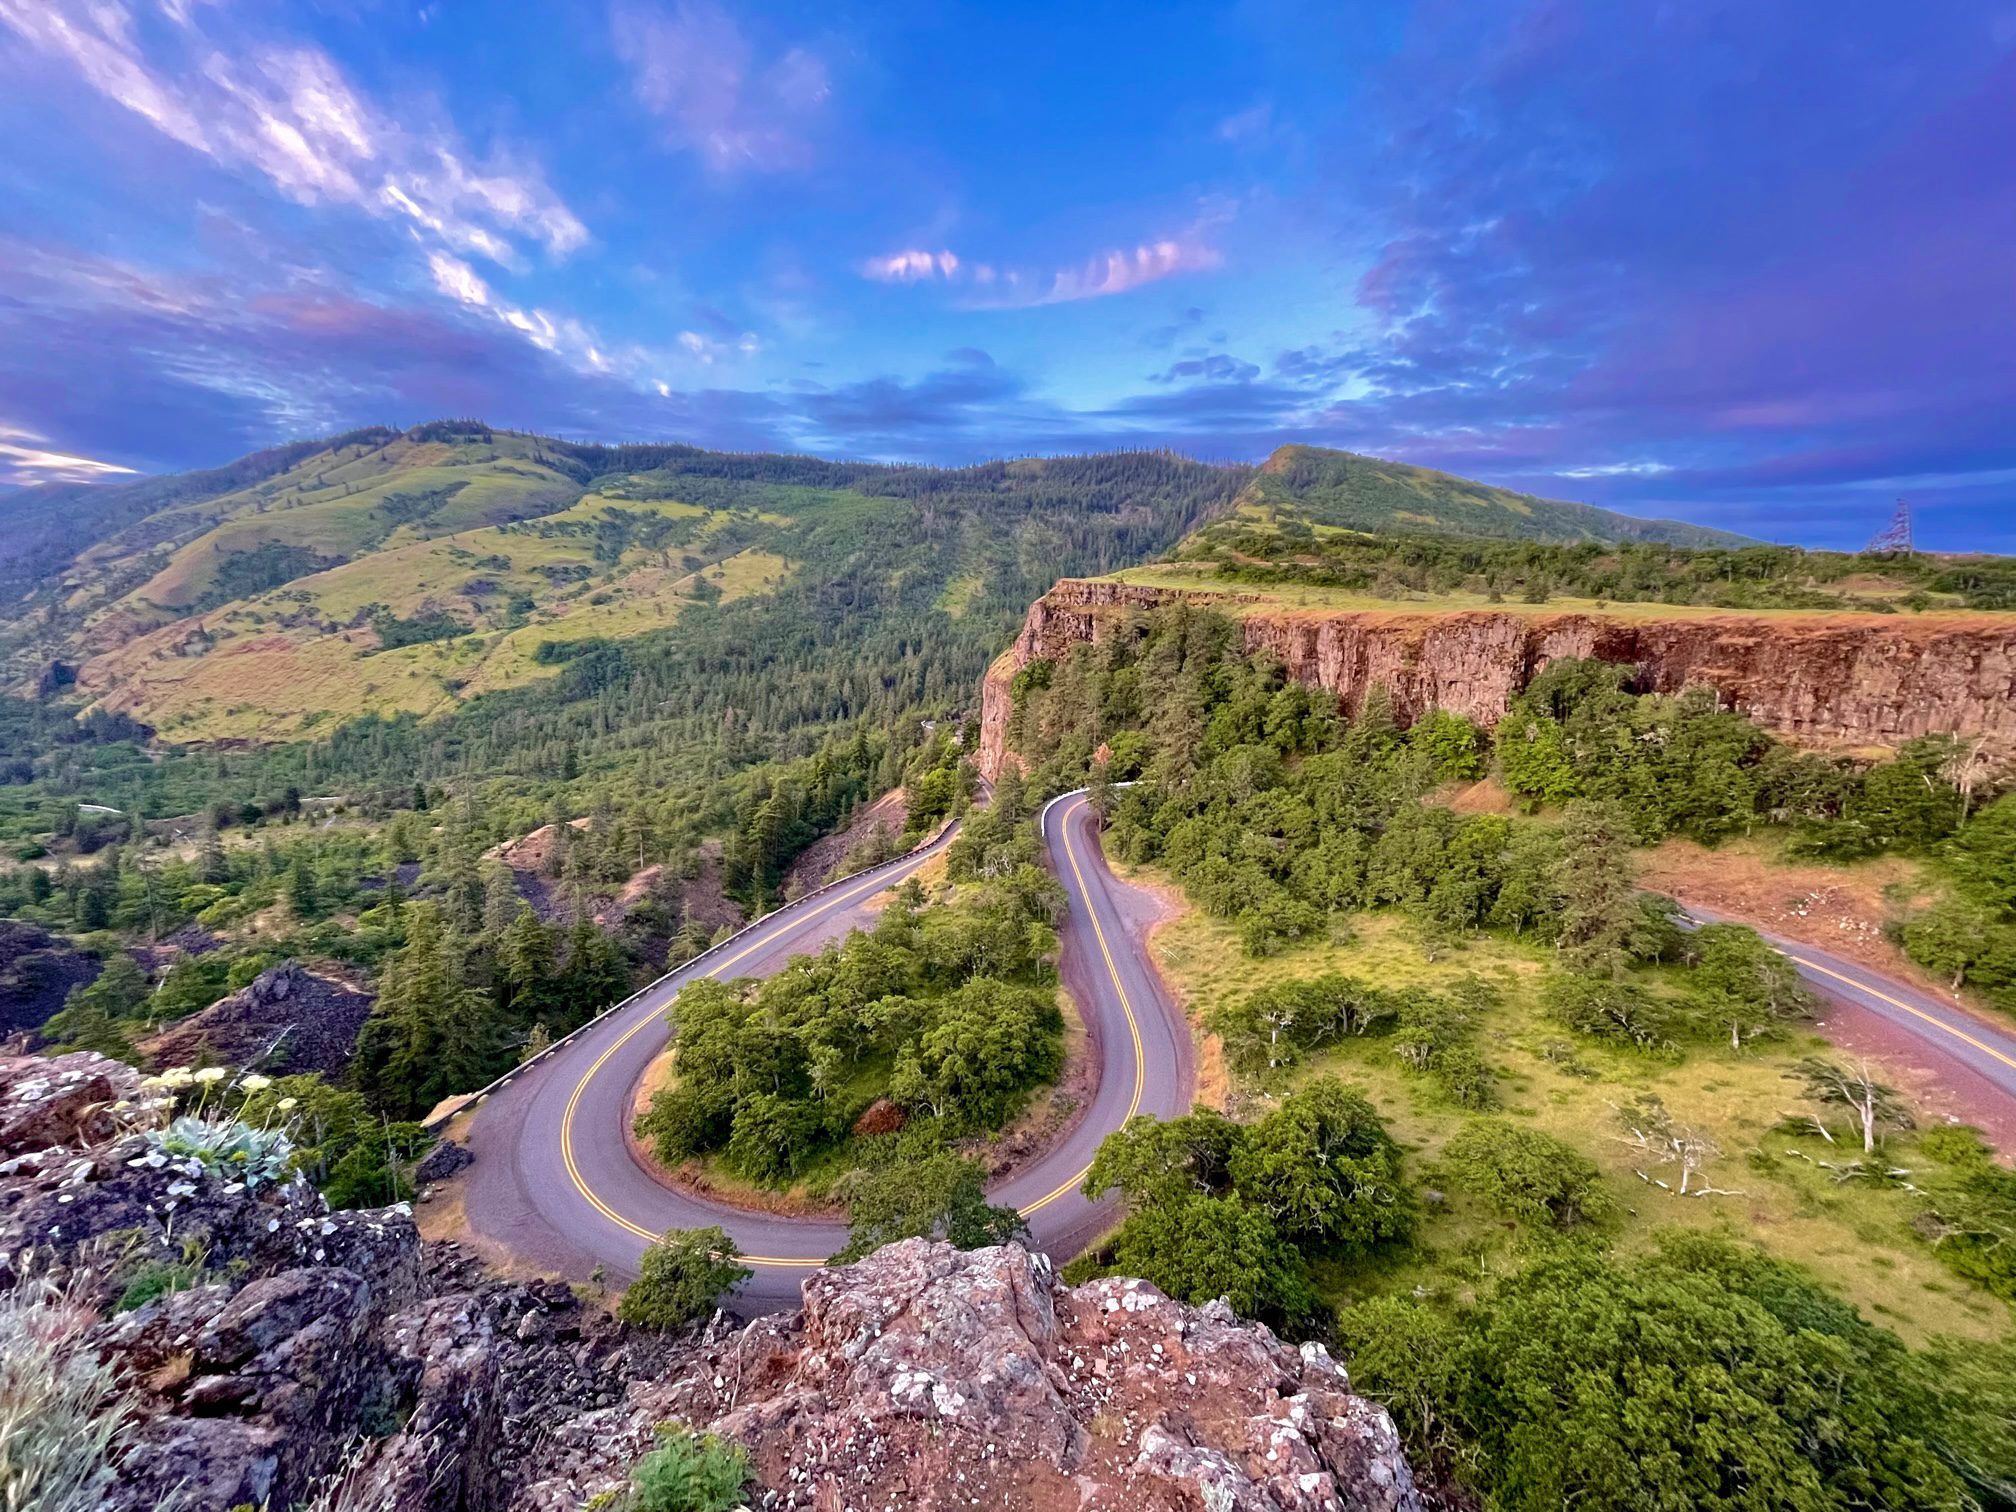 The Ultimate Pacific Northwest Road Trip: How to Spend 1, 2, 3, or 4 Weeks